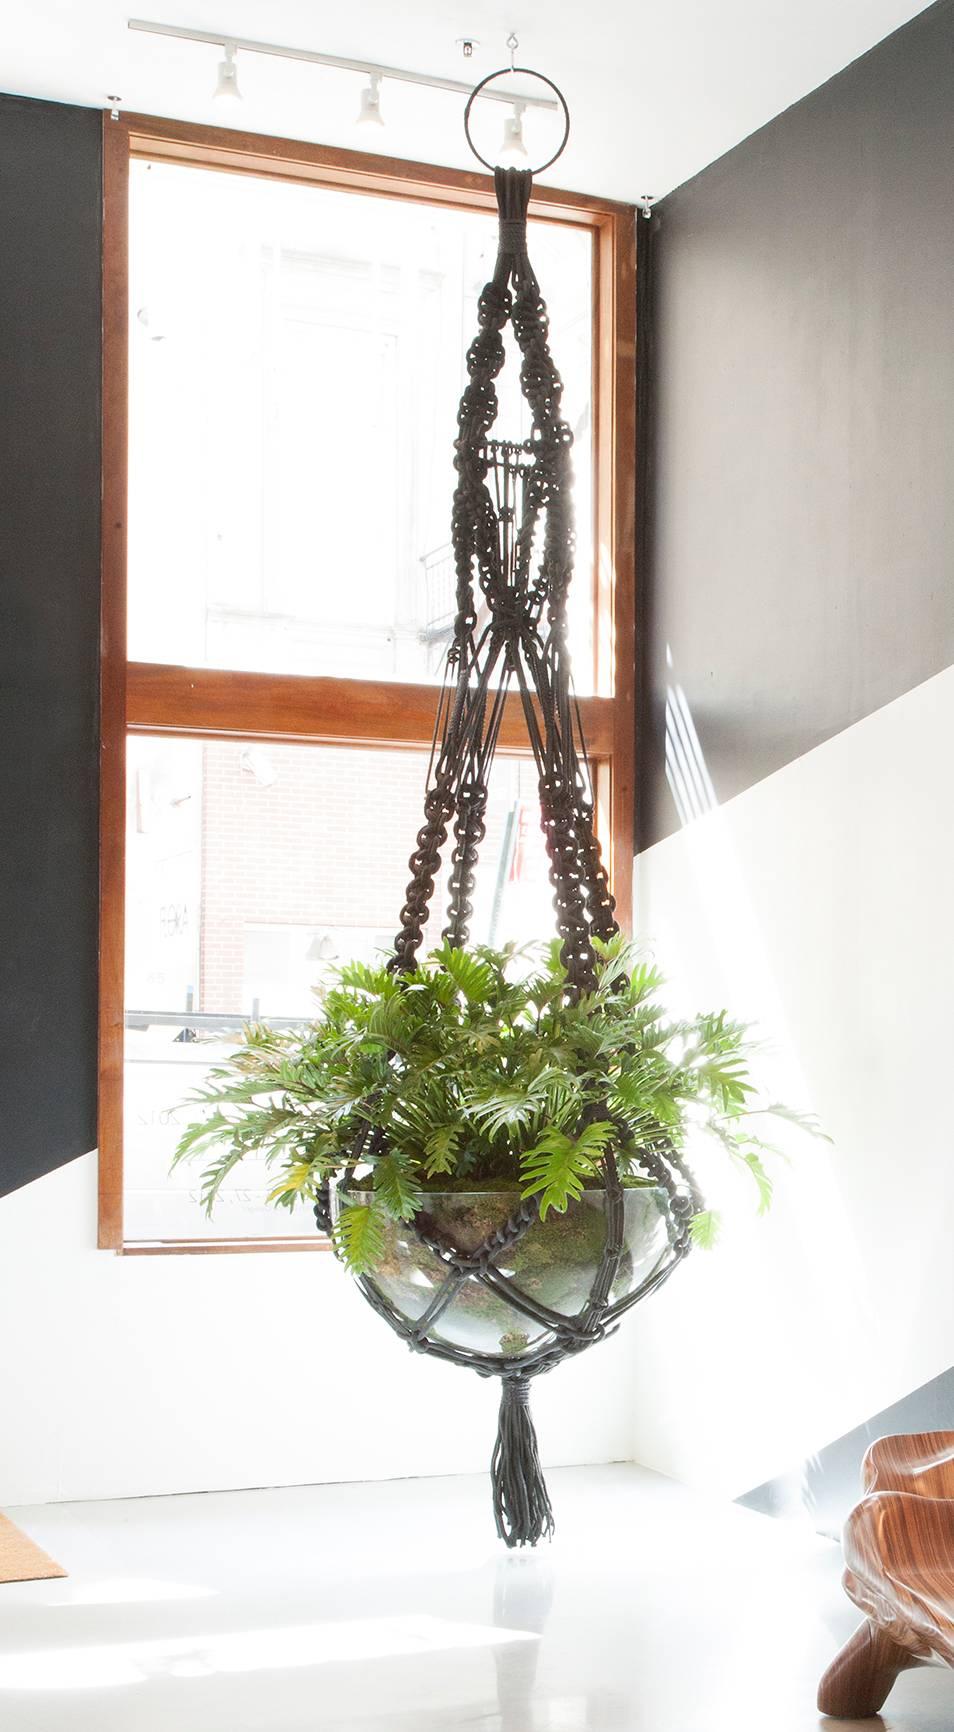 Large-scale hand-knotted macrame plant hanger available in custom sizes and colors with a variety of trims and ornamentation.
Price Listed is for 5'-6' Plant Hanger. Prices for larger sizes are as follows:

7 ' - 8 '    Plant Hanger:  $ 1,325.00
9 '